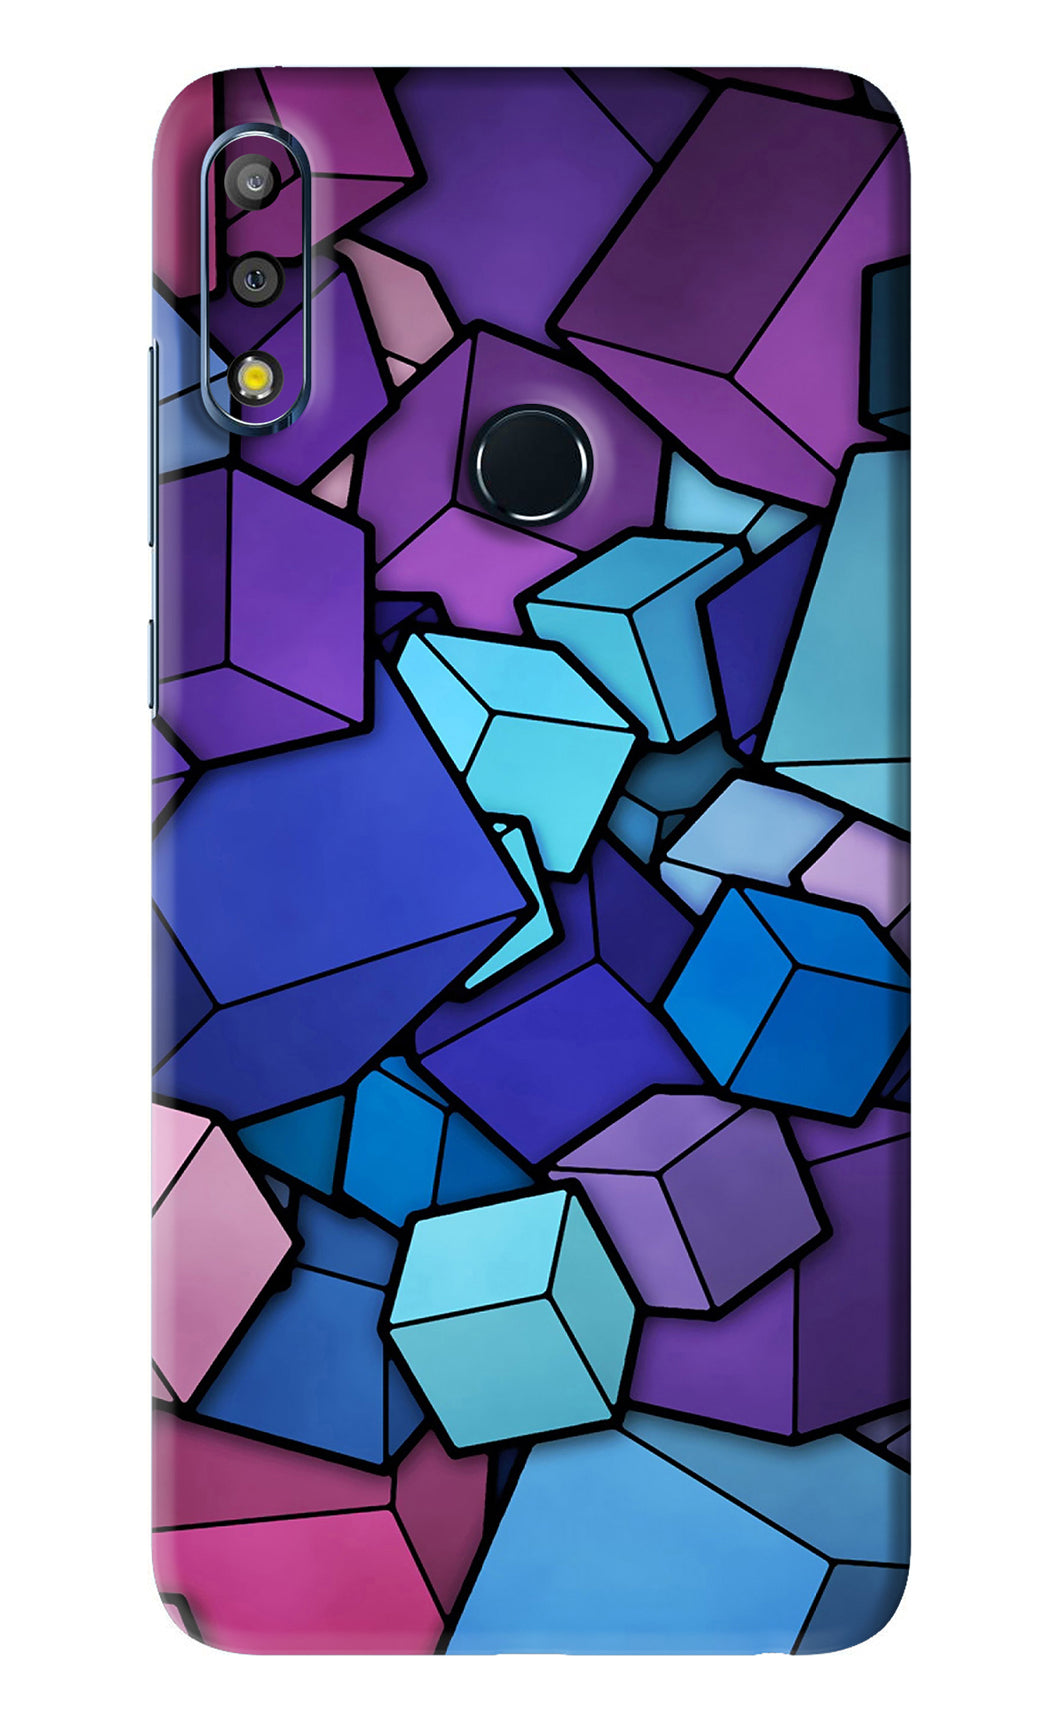 Cubic Abstract Asus Zenfone Max Pro M2 Back Skin Wrap